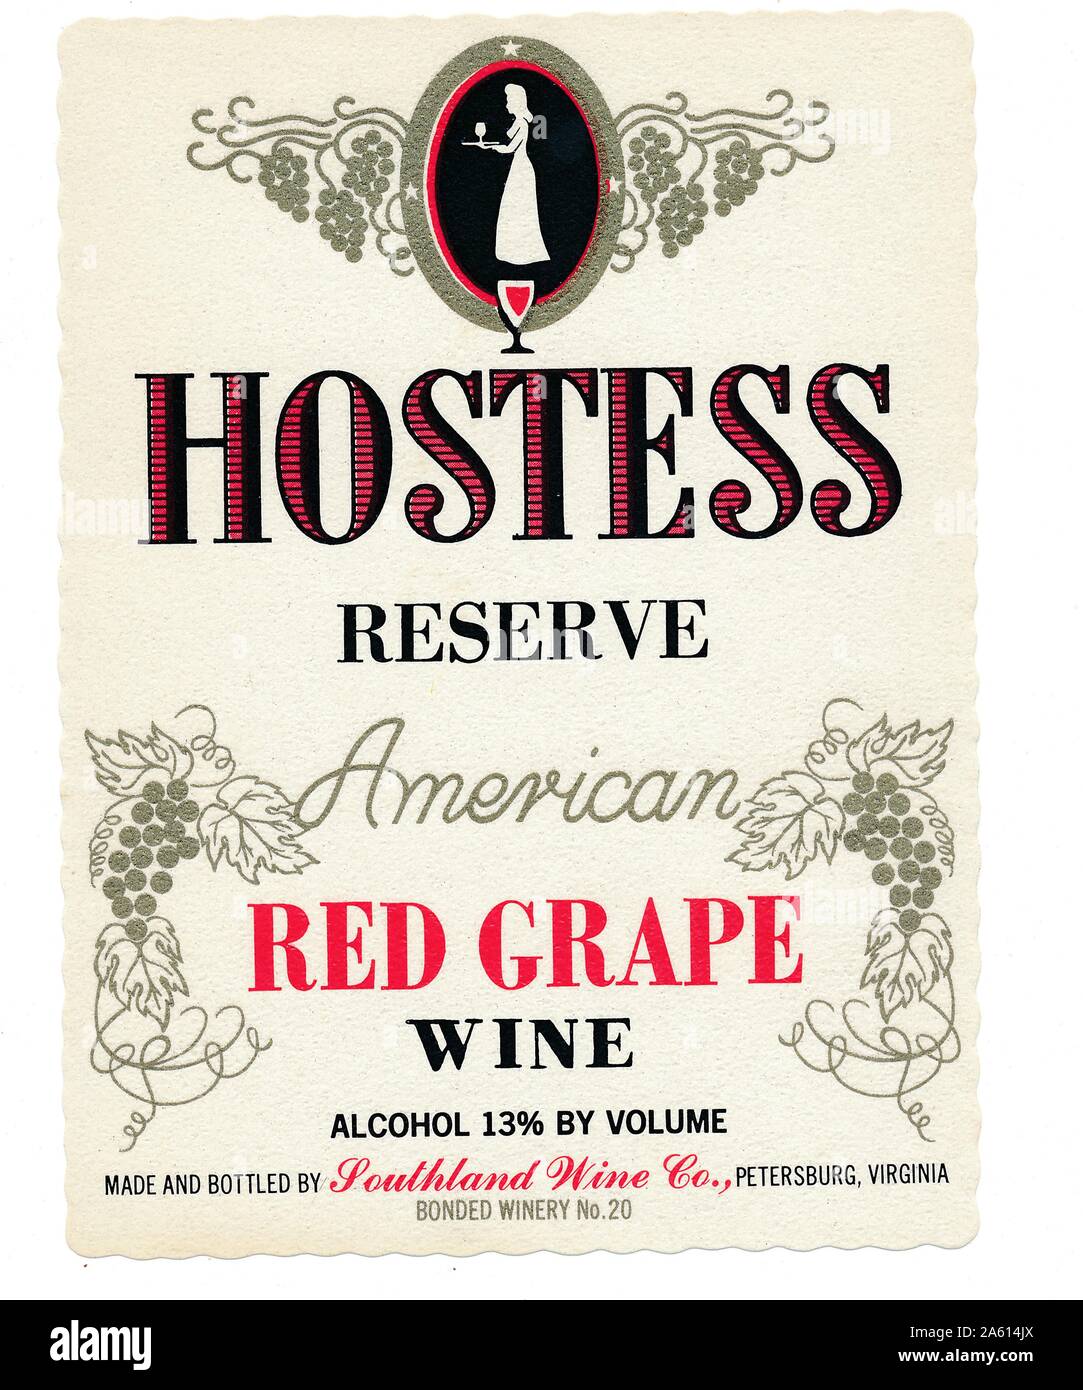 Vintage label for a bottle of 'Hostess Reserve' red wine, with a silhouette of a woman carrying a wine glass on a tray, bottled by the Southland Wine Company, Petersburg, Virginia, 1945. () Stock Photo